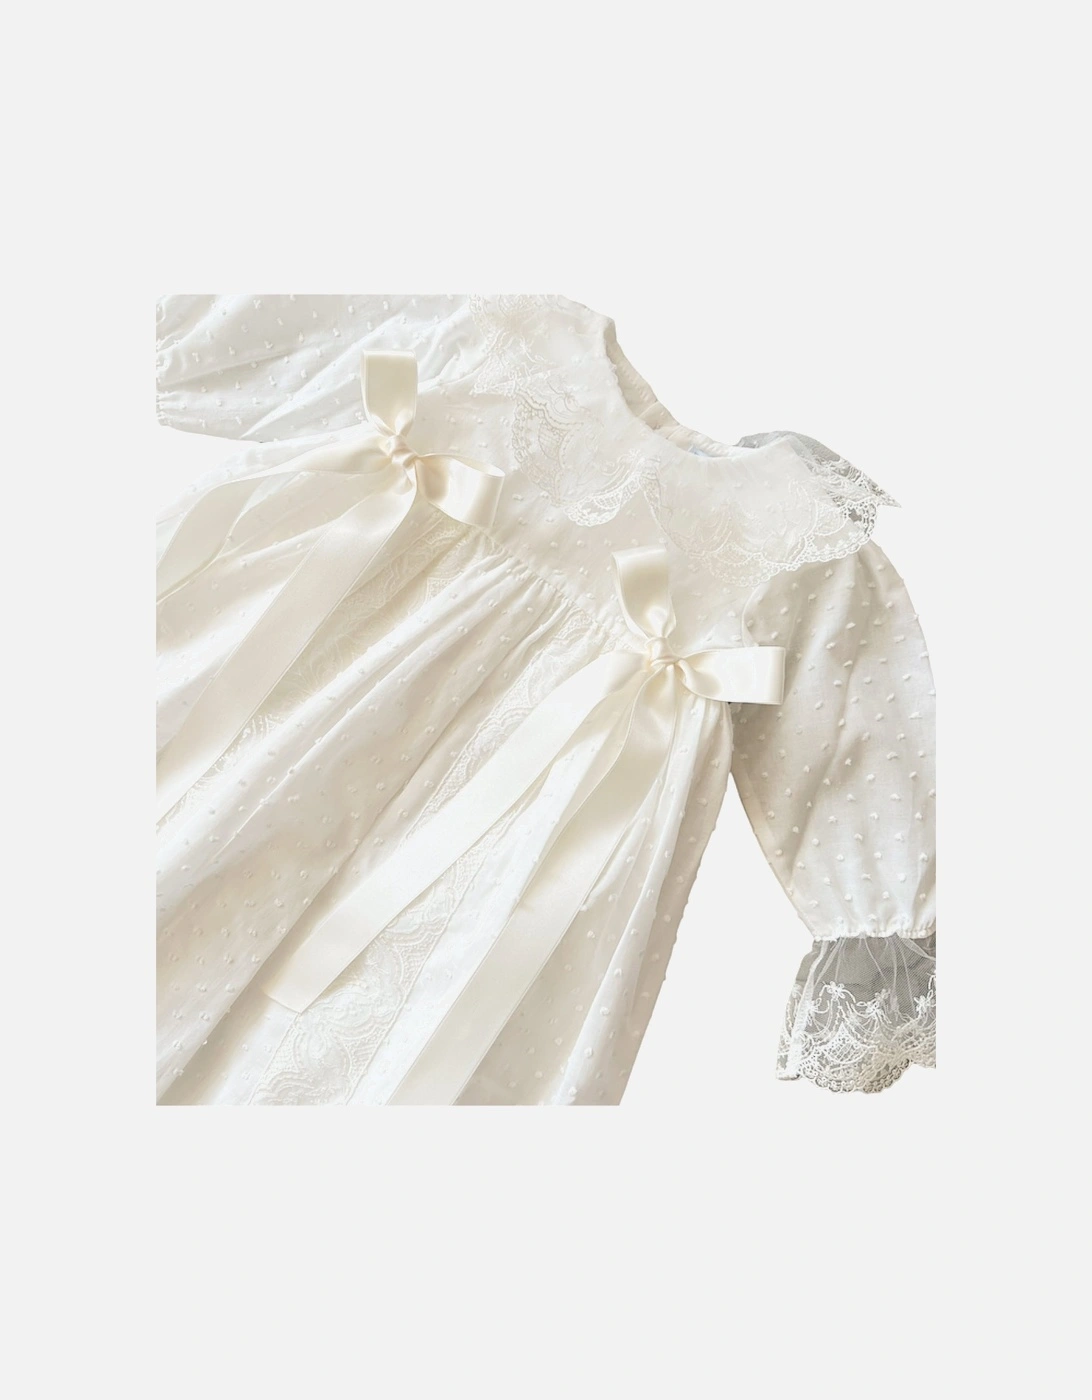 Ivory Christening Gown